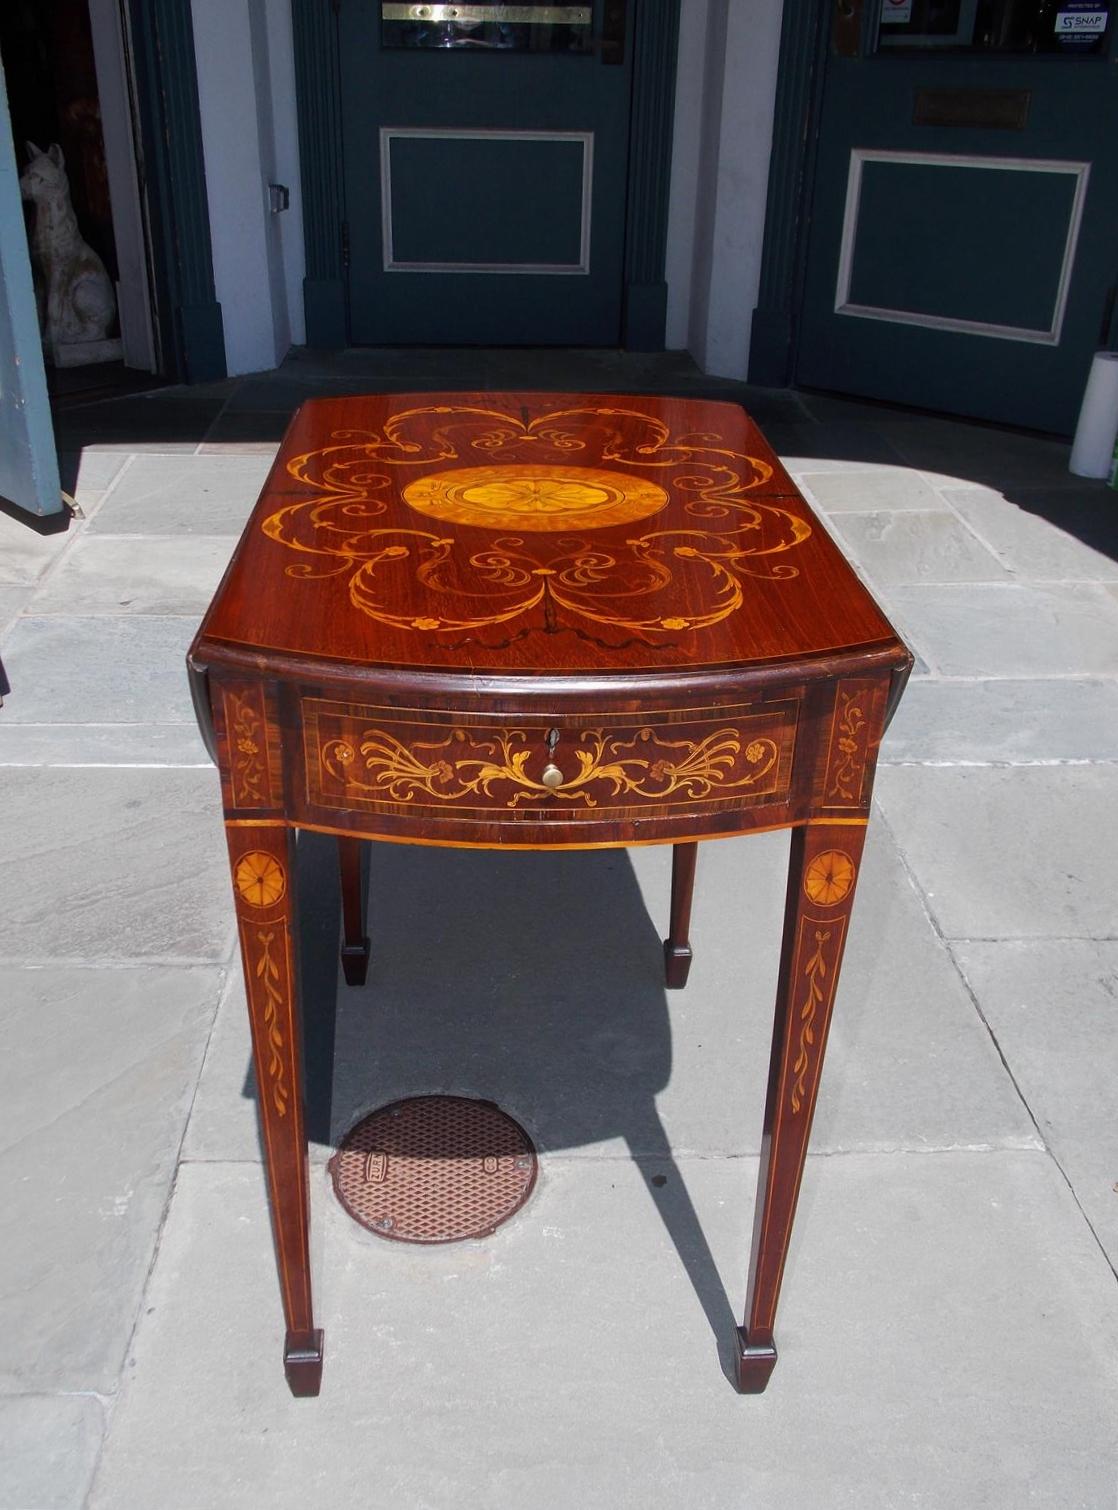 English Hepplewhite mahogany one drawer drop leaf pembroke table with satinwood scrolled floral inlays, cross banded tulip wood inlays, oval patera fan inlays, string inlays, original brass & interior lock, and terminating on tapered squared legs